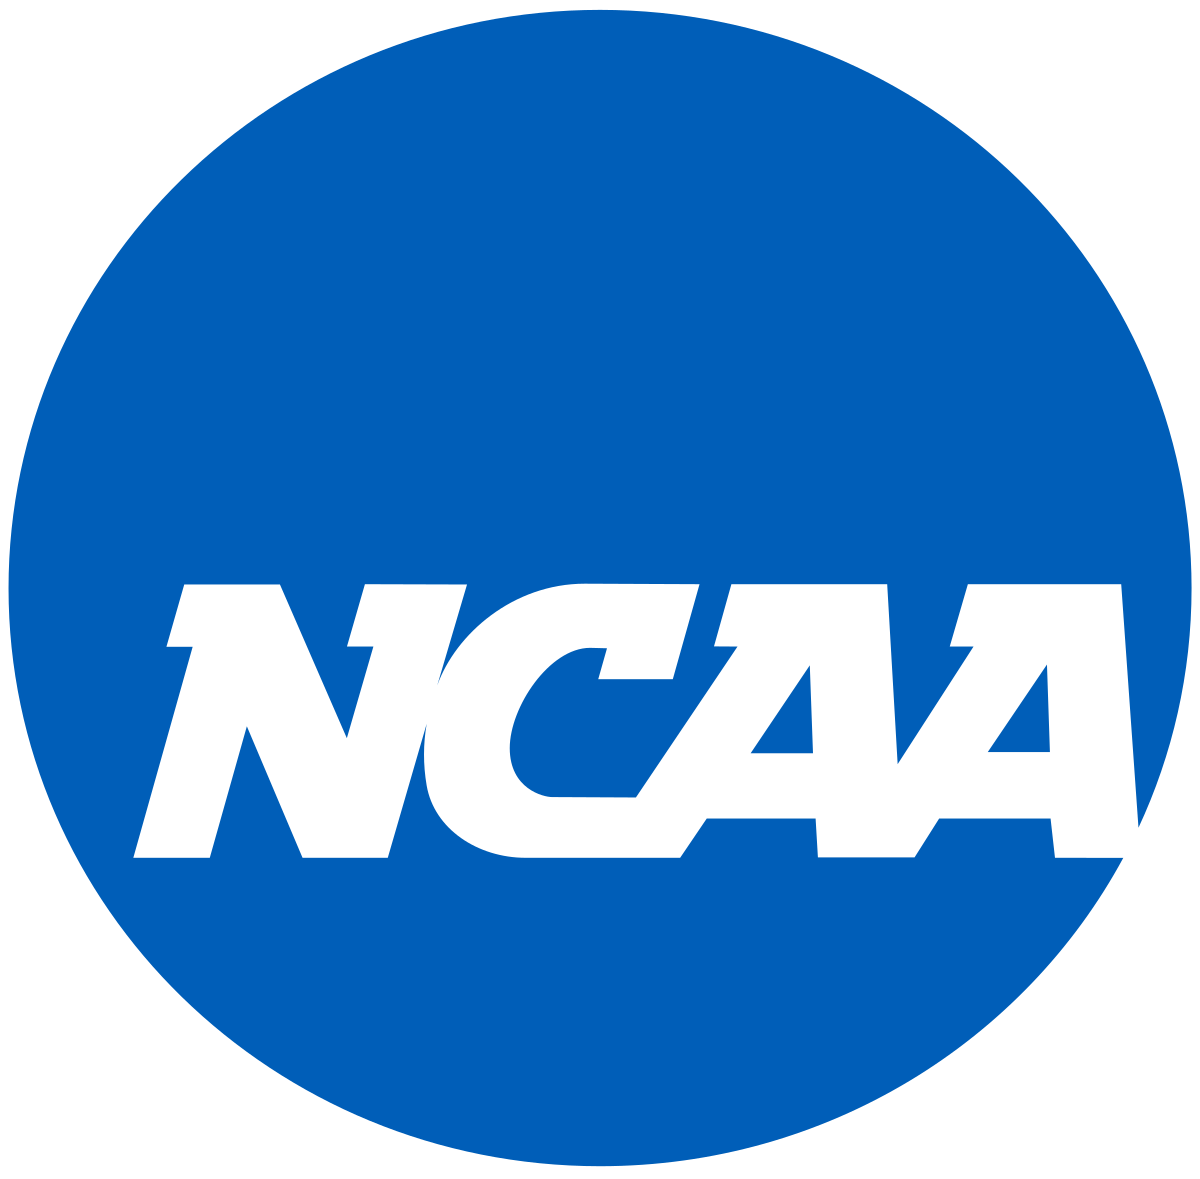 The NCAA are reportedly considering allowing athletes to earn endorsements ©NCAA